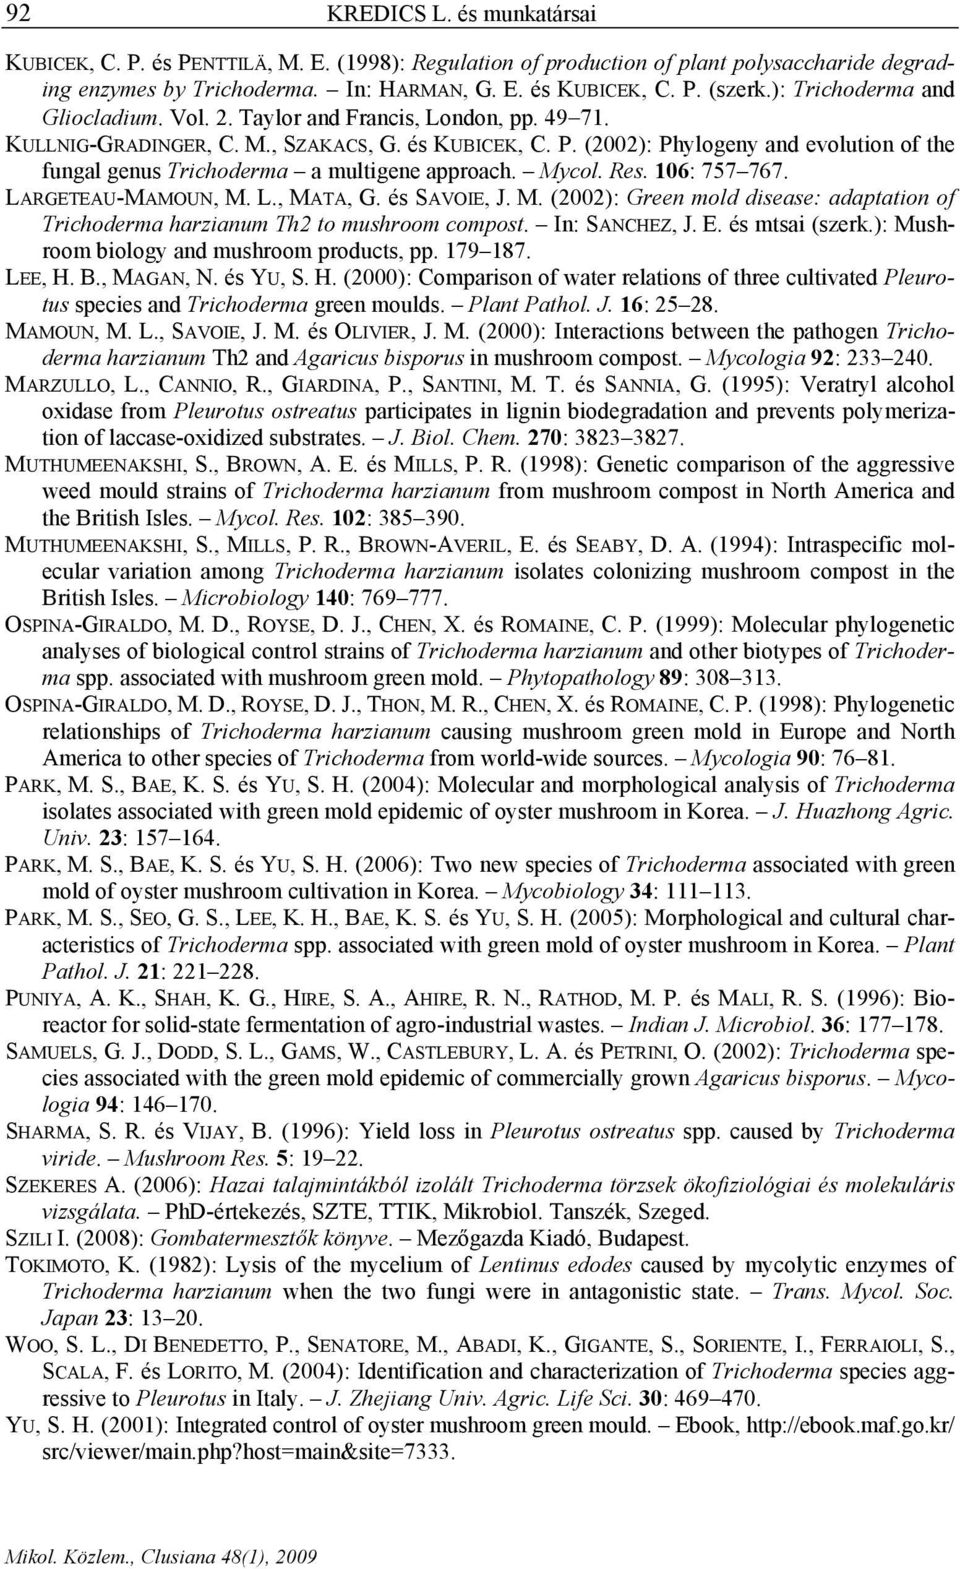 (2002): Phylogeny and evolution of the fungal genus Trichoderma a multigene approach. Mycol. Res. 106: 757 767. LARGETEAU-MAMOUN, M. L., MATA, G. és SAVOIE, J. M. (2002): Green mold disease: adaptation of Trichoderma harzianum Th2 to mushroom compost.